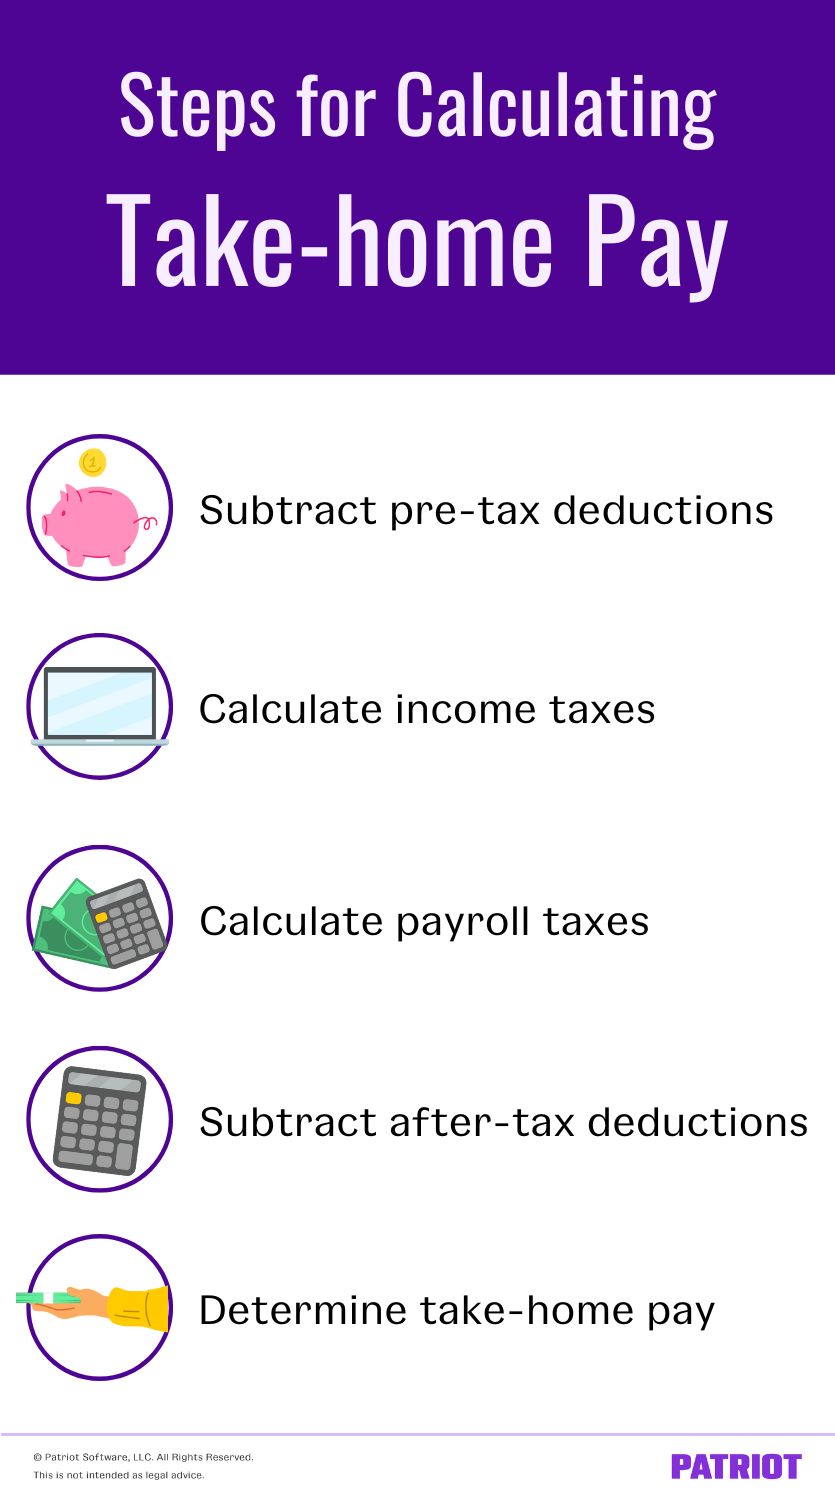 steps for calculating take-home pay: subtract pre-tax deductions, calculate income taxes, calculate payroll taxes, subtract after-tax deductions, determine take-home pay 